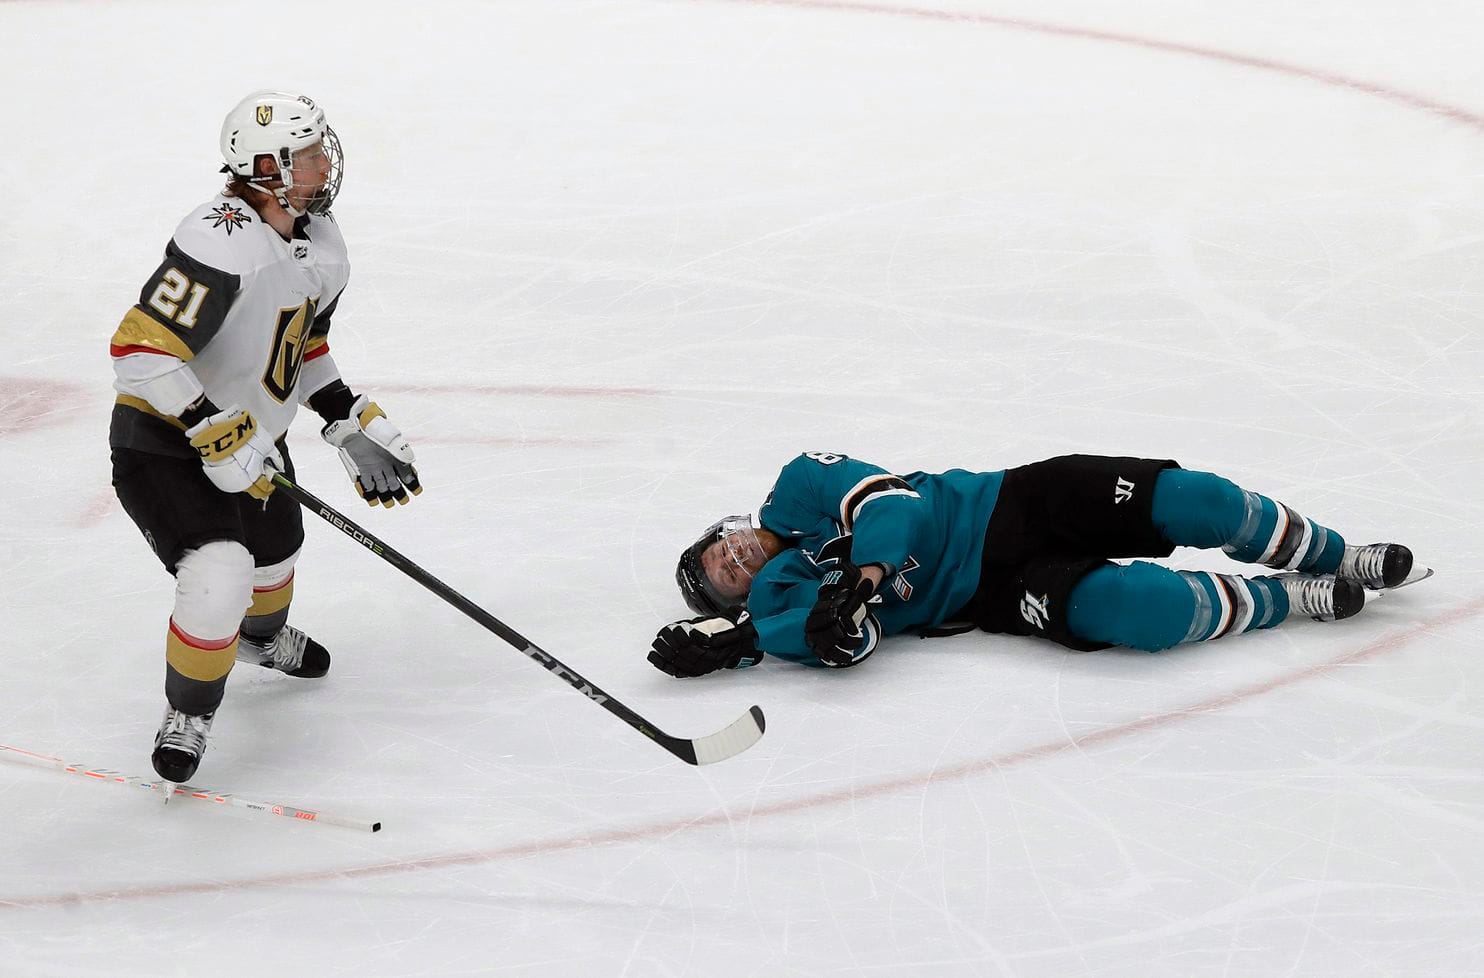 NHL Apologized For Crucial Penalty Call, Vegas Golden Knights Owner Says